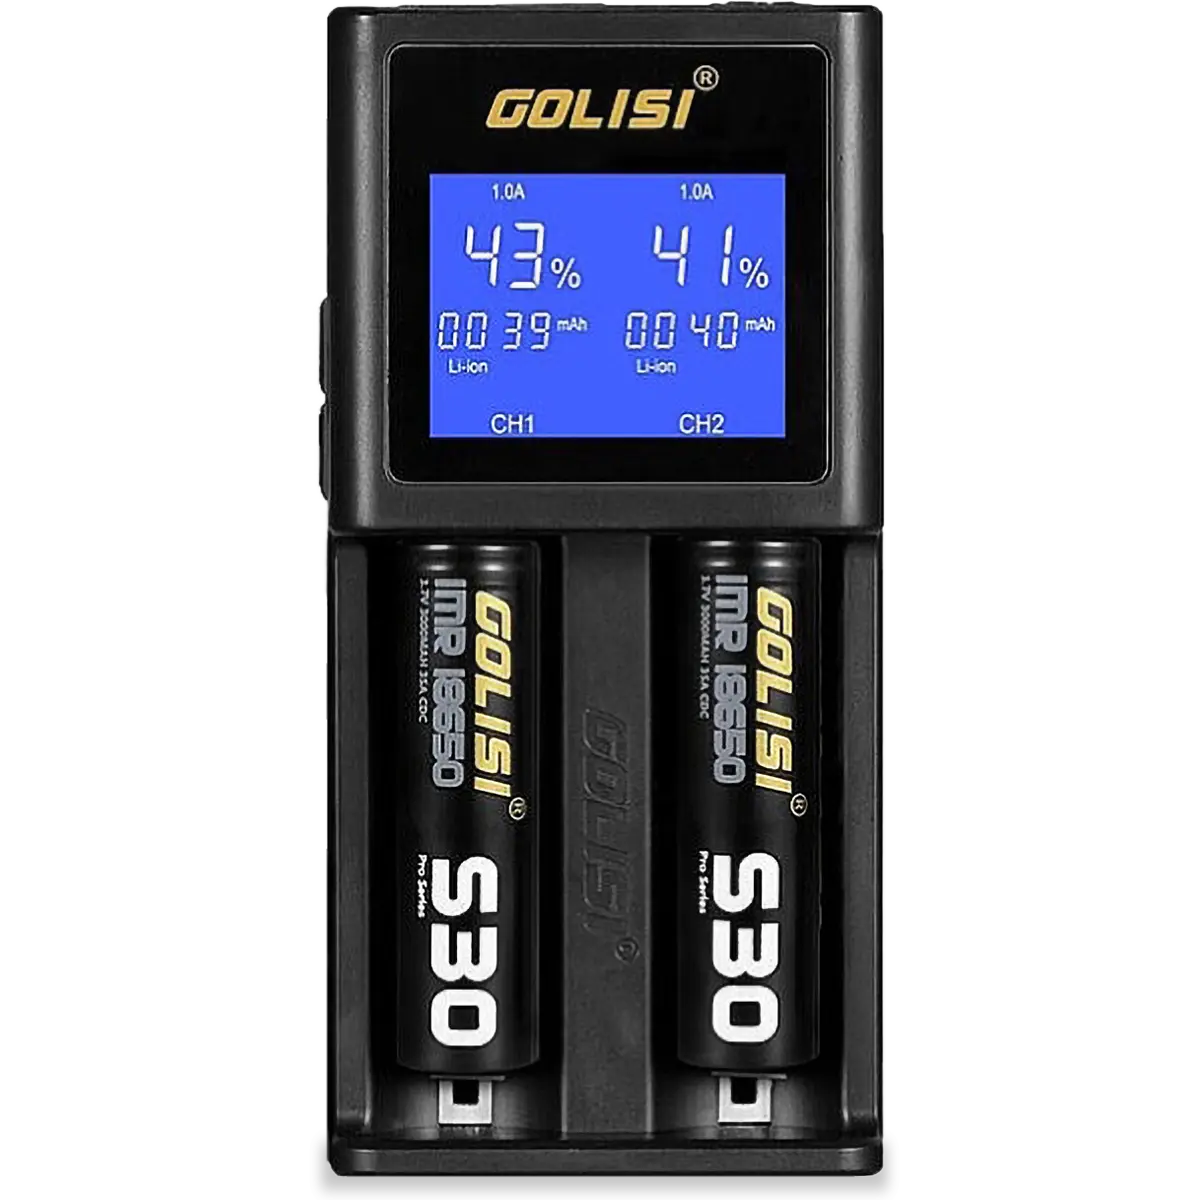 Golisi S2 charger